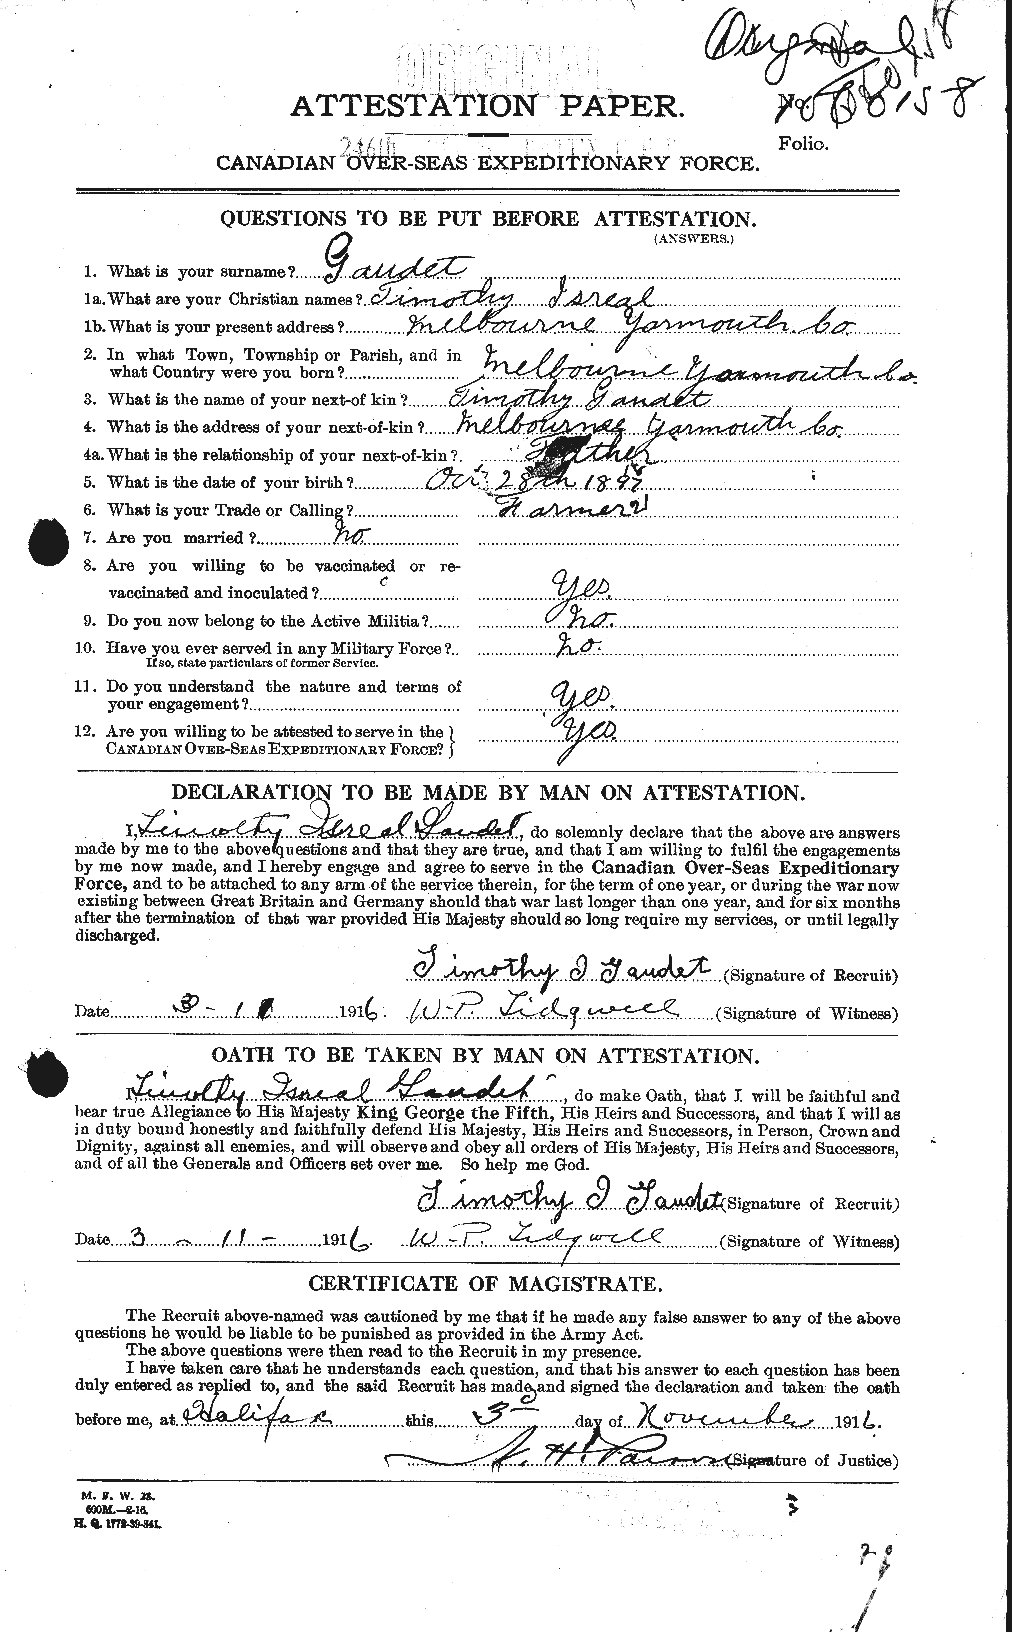 Personnel Records of the First World War - CEF 344525a